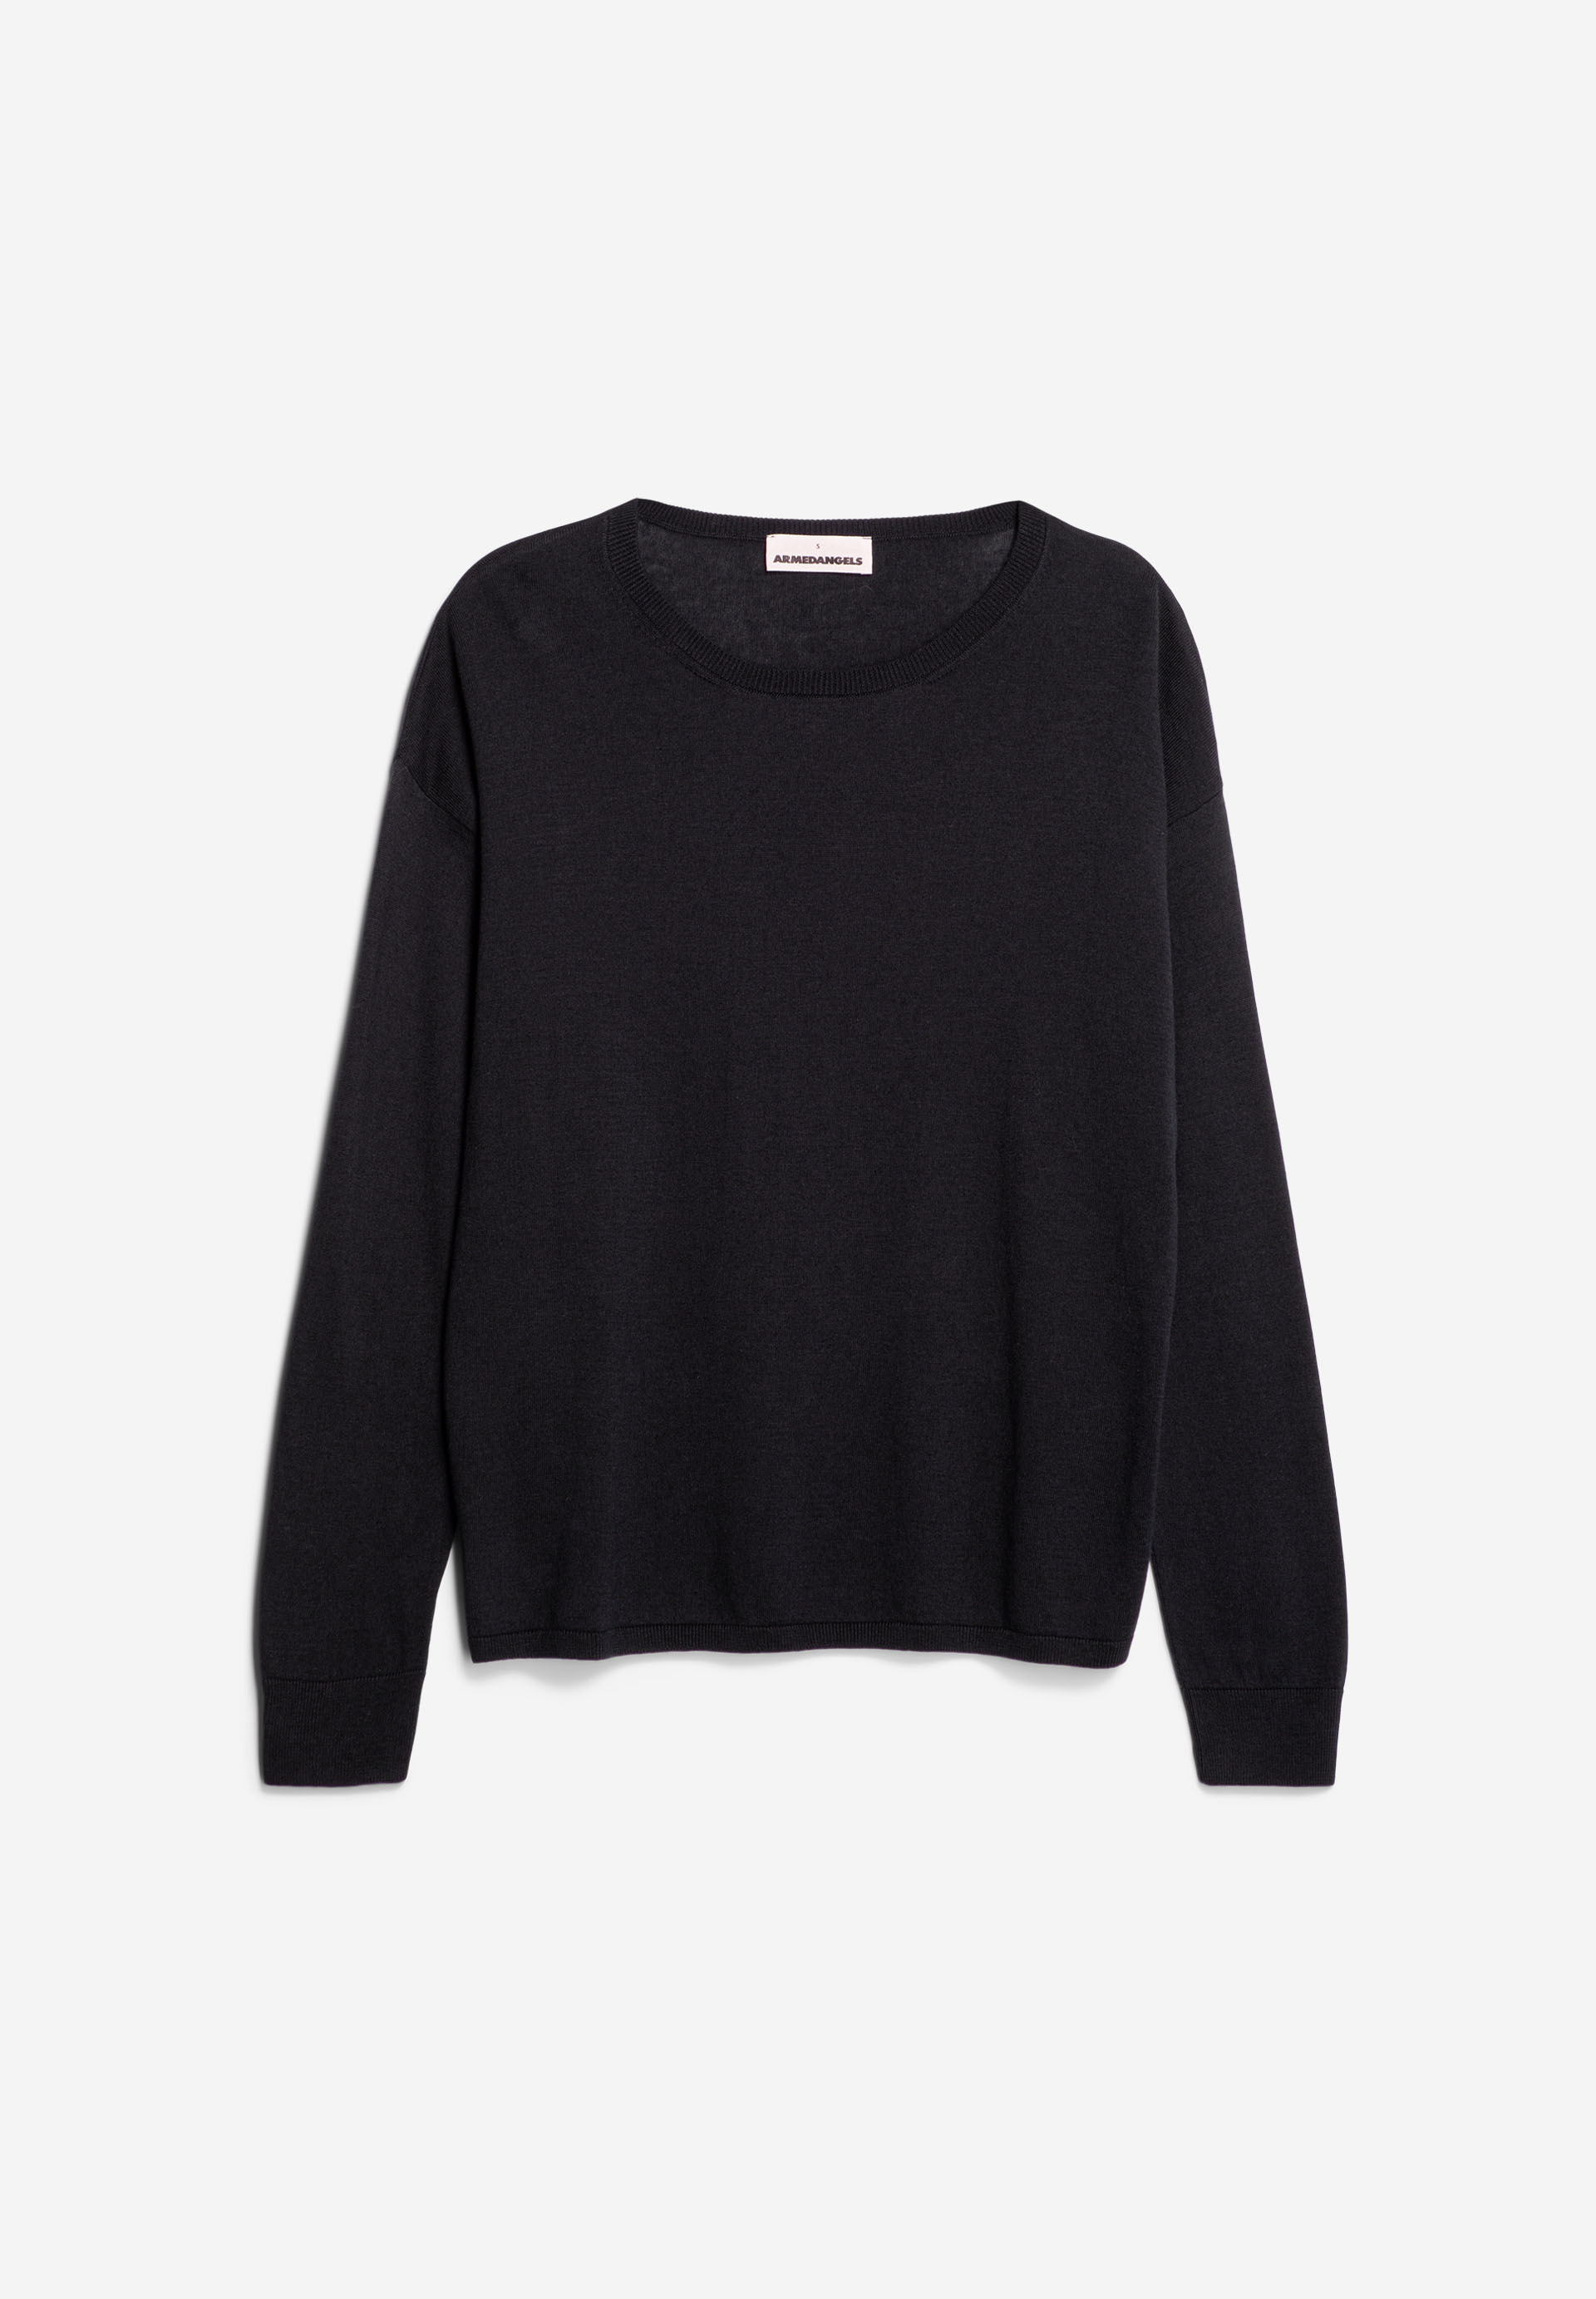 LAARNI Sweater Relaxed Fit made of TENCEL™ Lyocell Mix